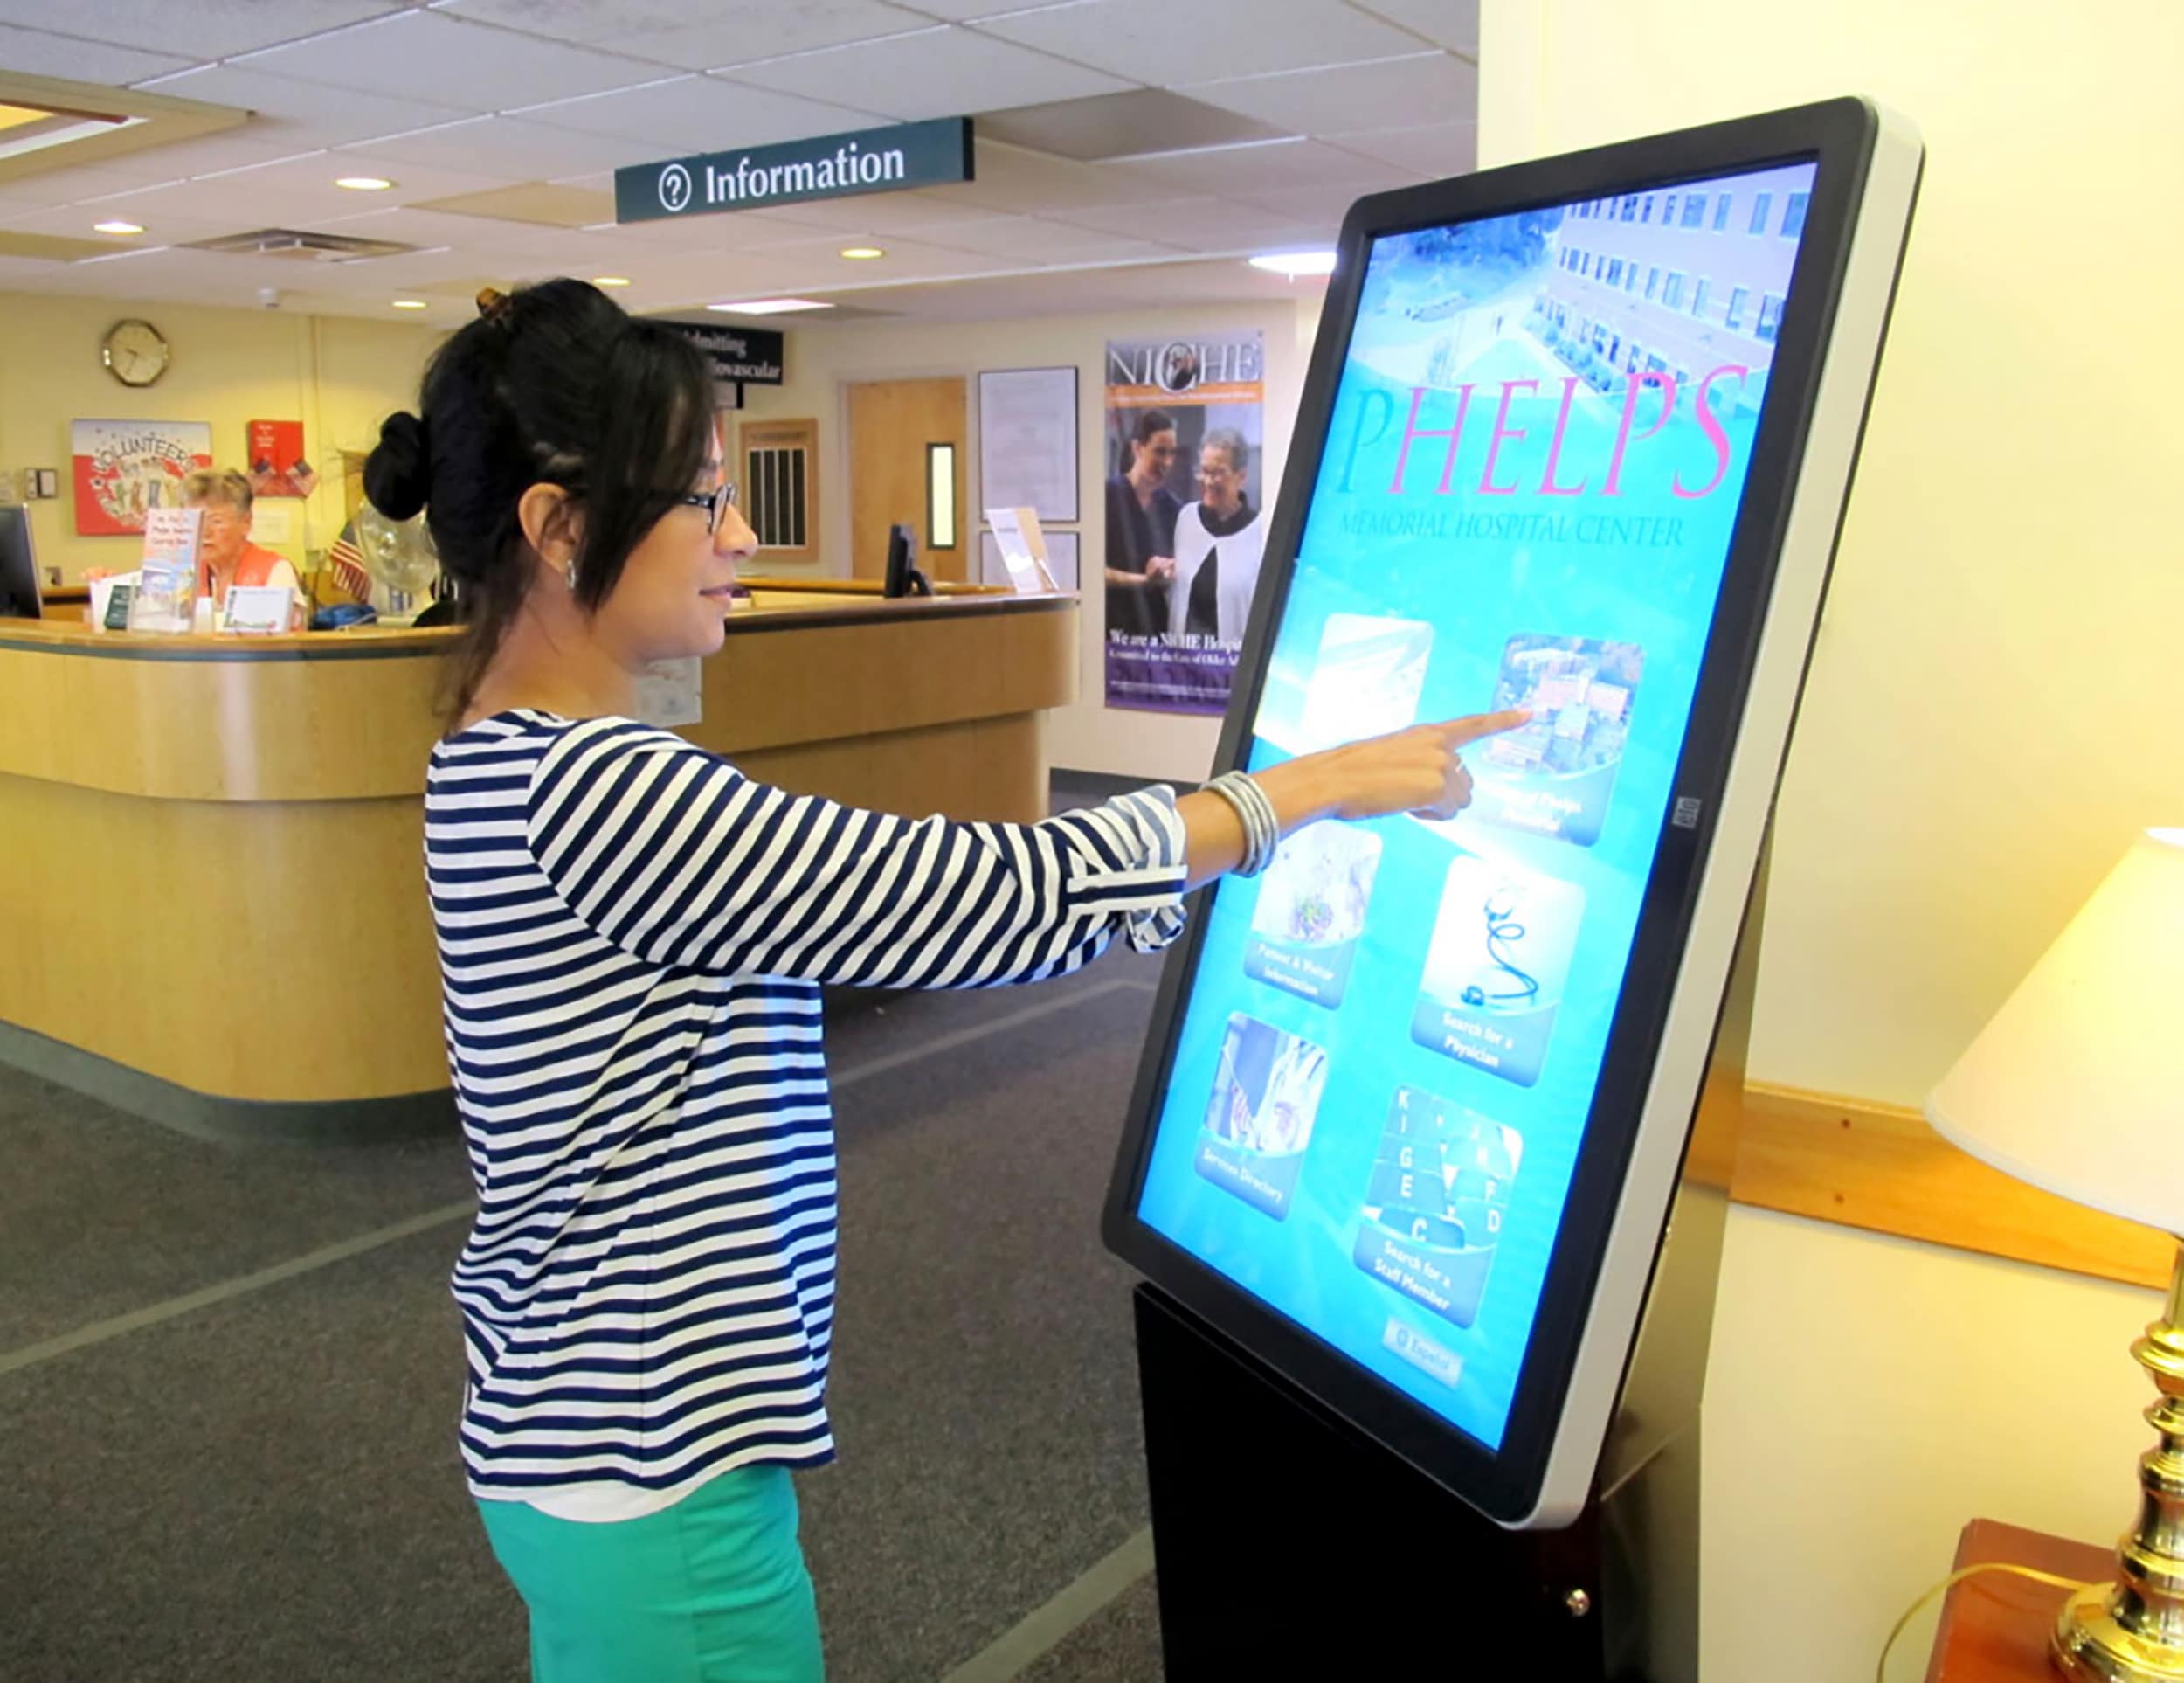  Kiosks offering interactive help via touchscreen technology are popping up in malls, health care centers, educational complexes and more.